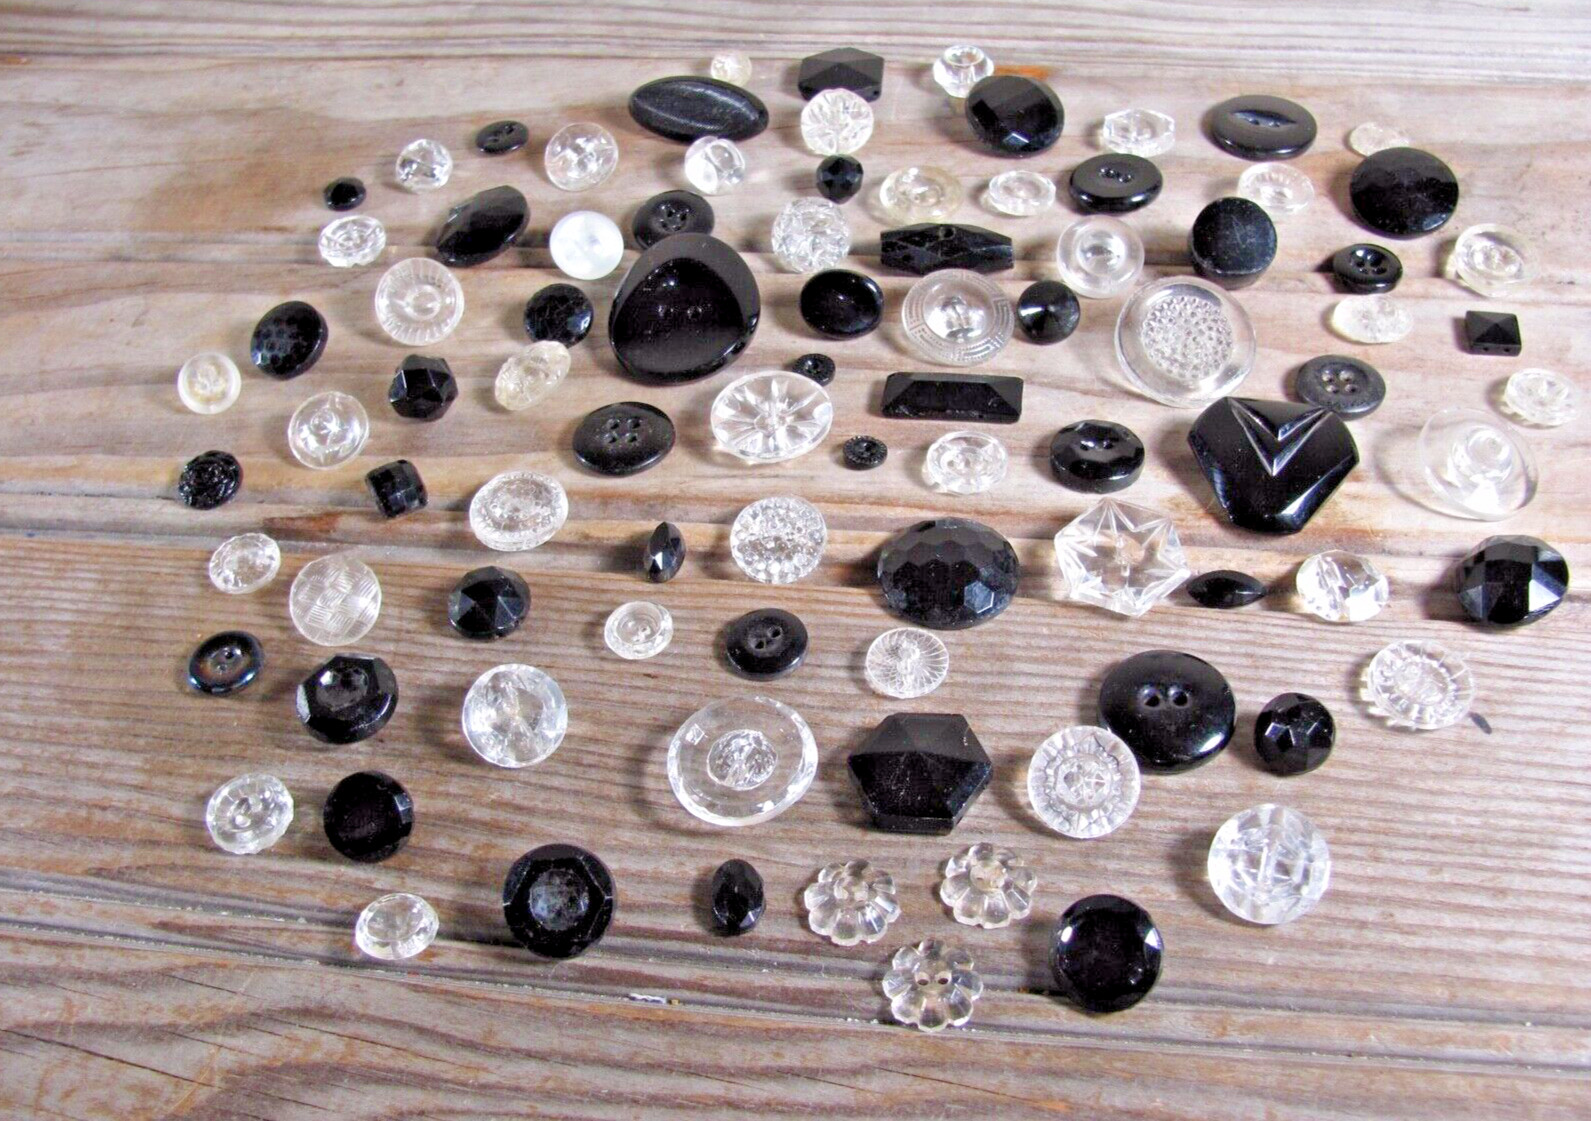 ATQ VTG Lot of 90 clear & black glass crystal buttons reverse facet fancy cut